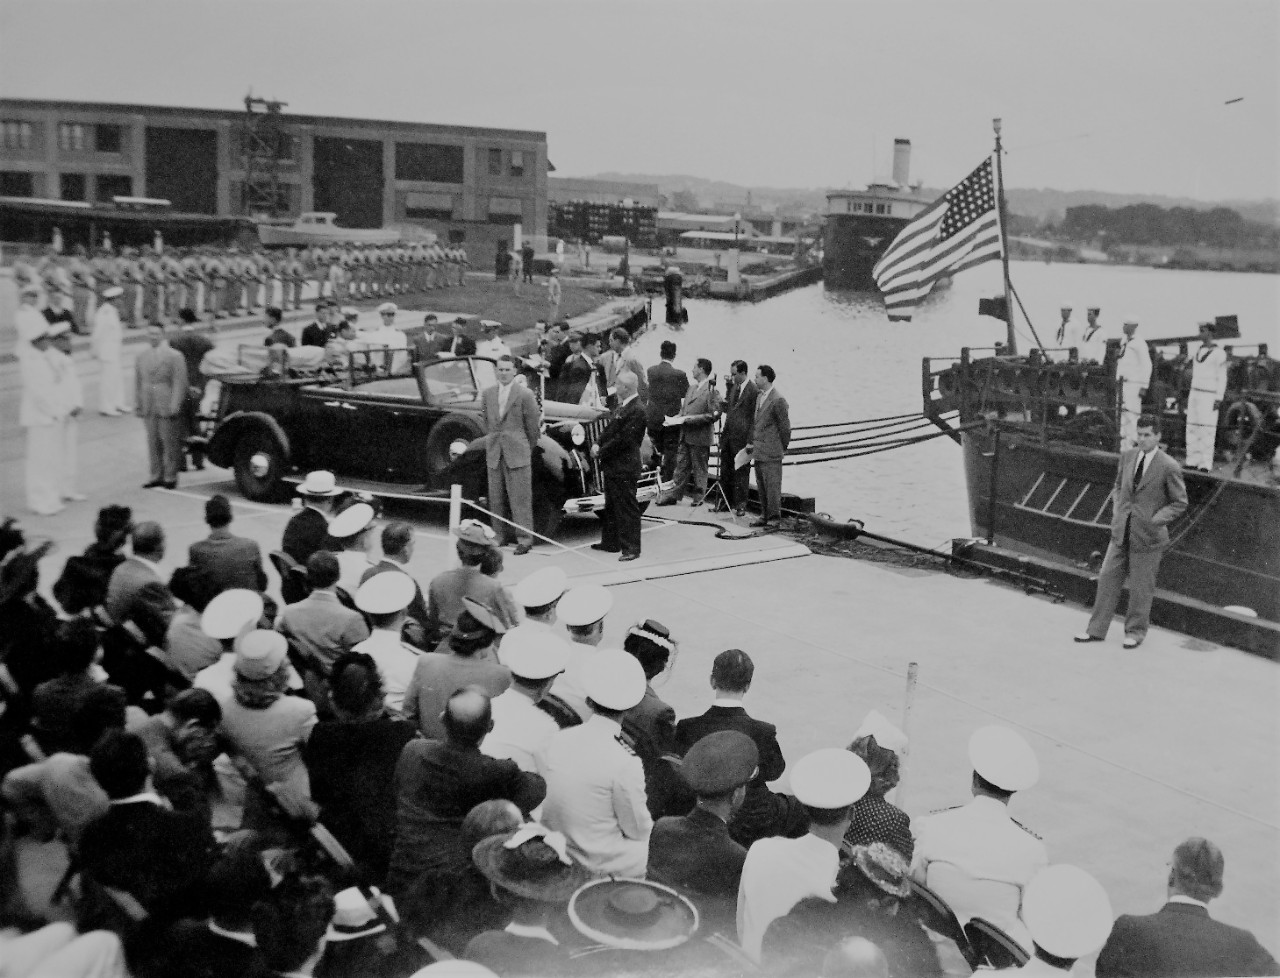 LC-Lot-4263-48:   Greek Ambassador Visit, Washington Navy Yard, 1943.   Secretary of the Navy Frank Knox at the Washington Navy Yard, Washington, D.C., June 10, 1943.   The ceremony detailed the  presentation of a patrol boat to the Greek Government.  President Franklin D. Roosevelt and Greek Ambassador Cimon Diamantopoulous watch from the rear seat of their automobile as the American flag is about to be hauled down.  Secretary of the Navy Frank Knox Collection.   Courtesy of the Library of Congress.  